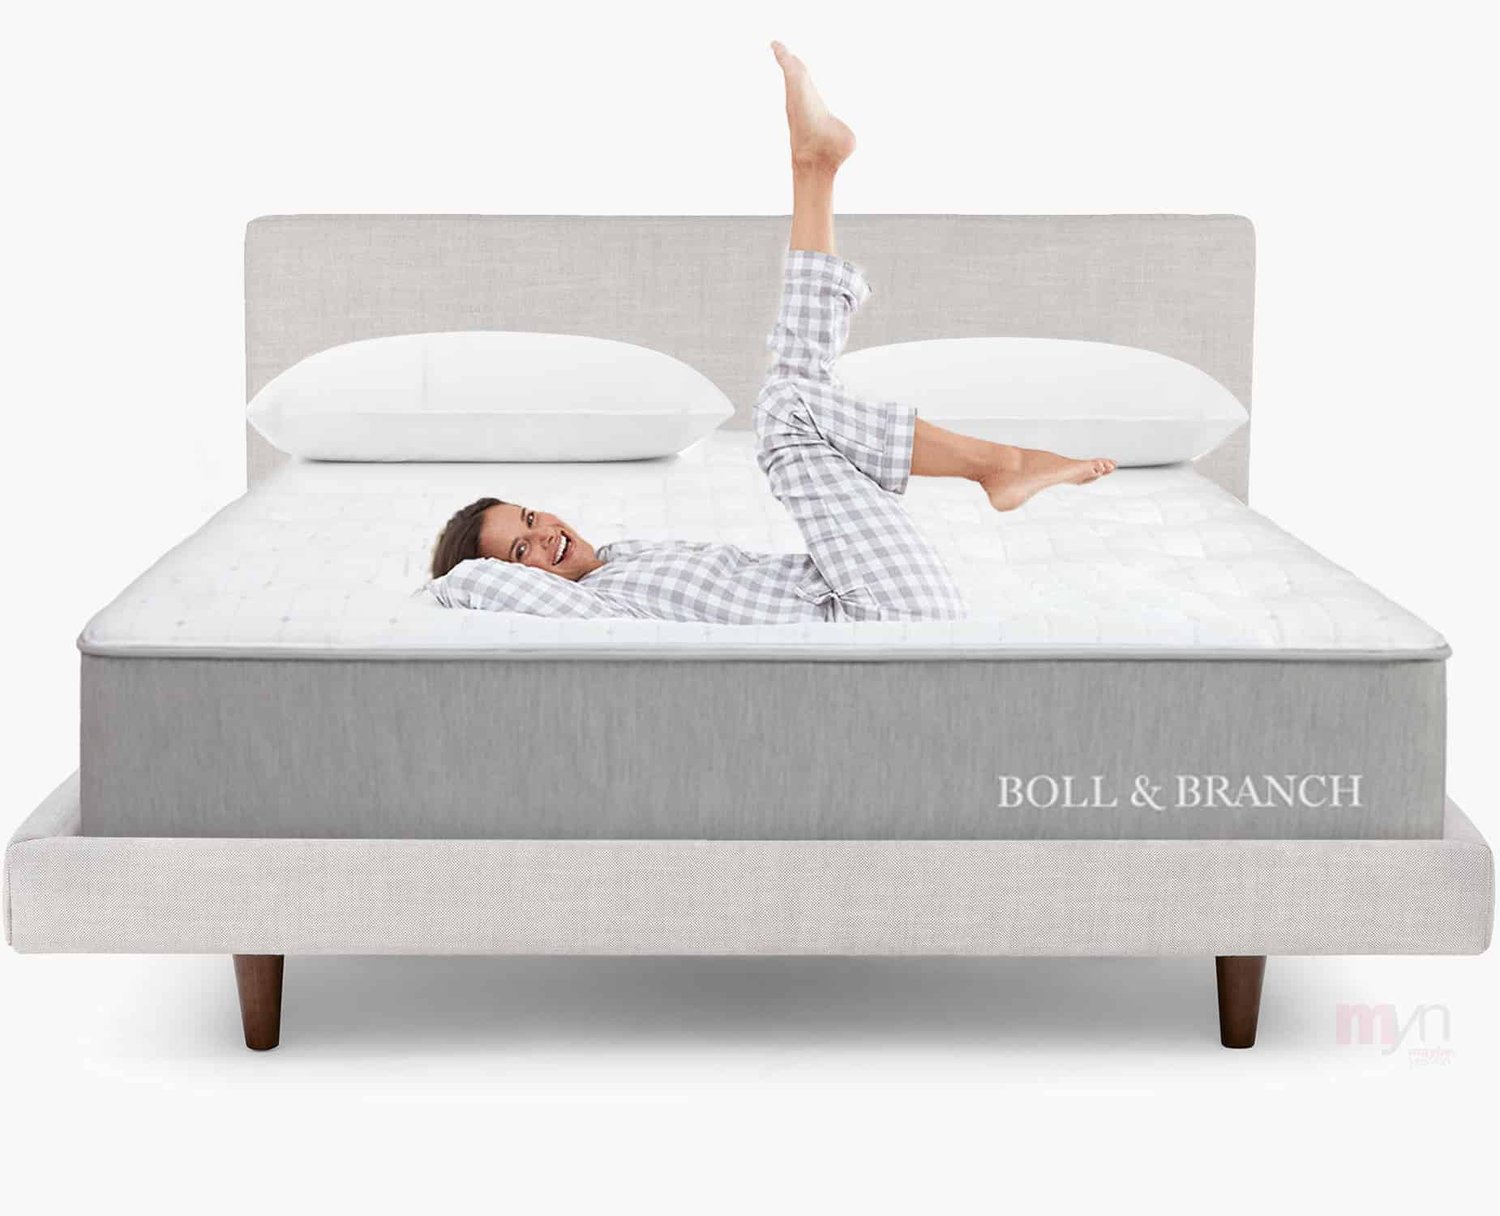 review of boll and branch mattress